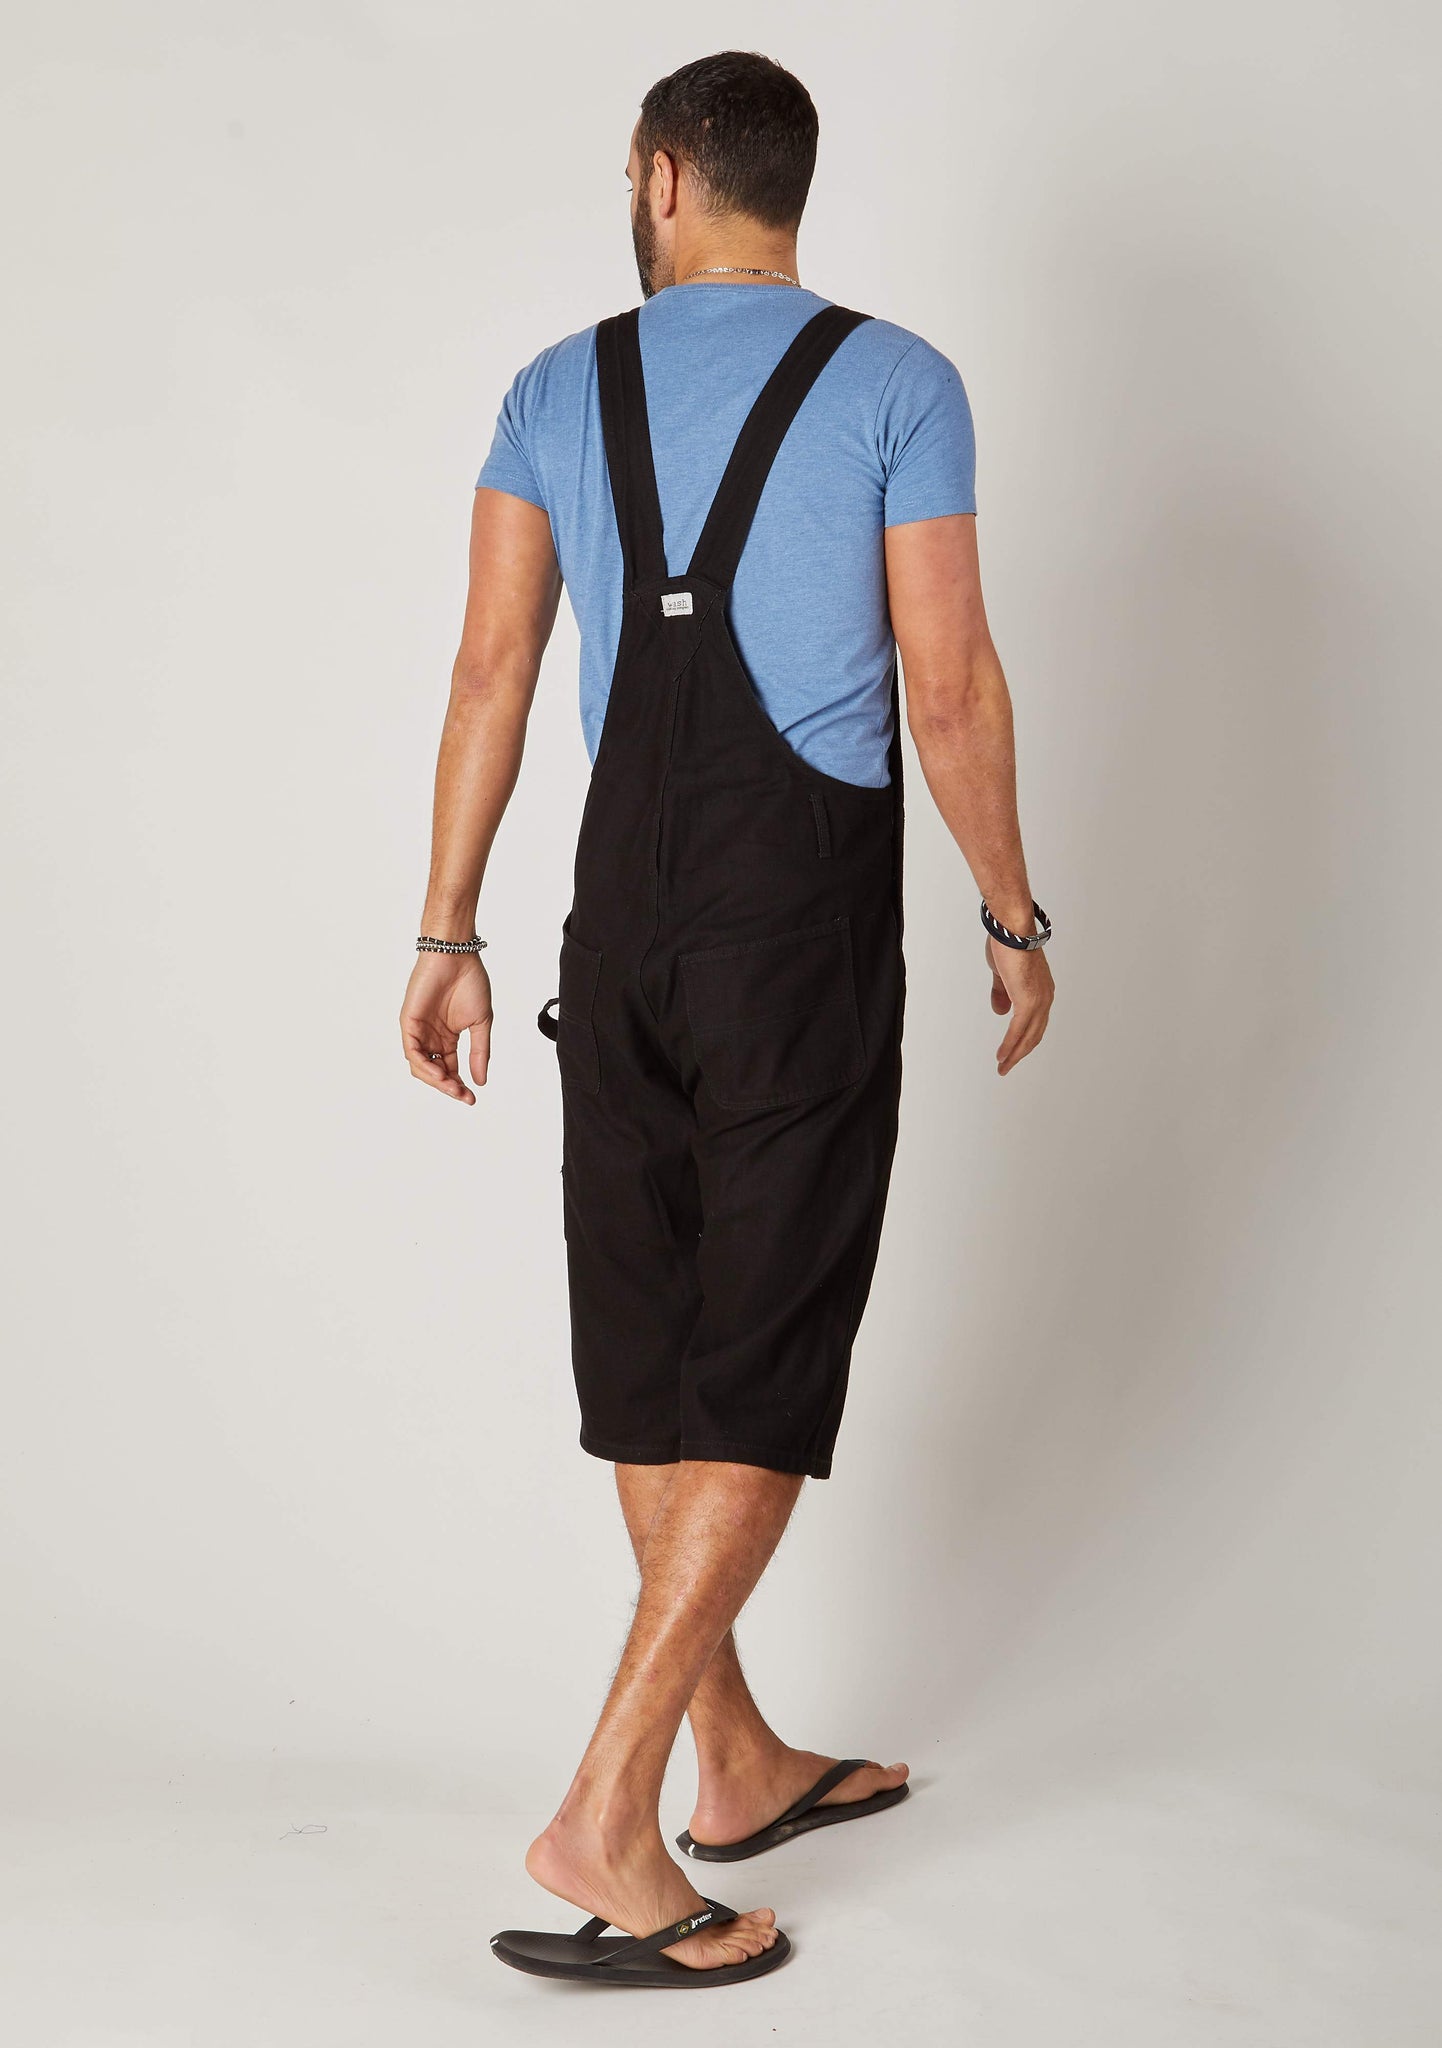 Rear twisted pose wearing ‘Chet’ brand black bib overalls shorts from Dungarees Online.